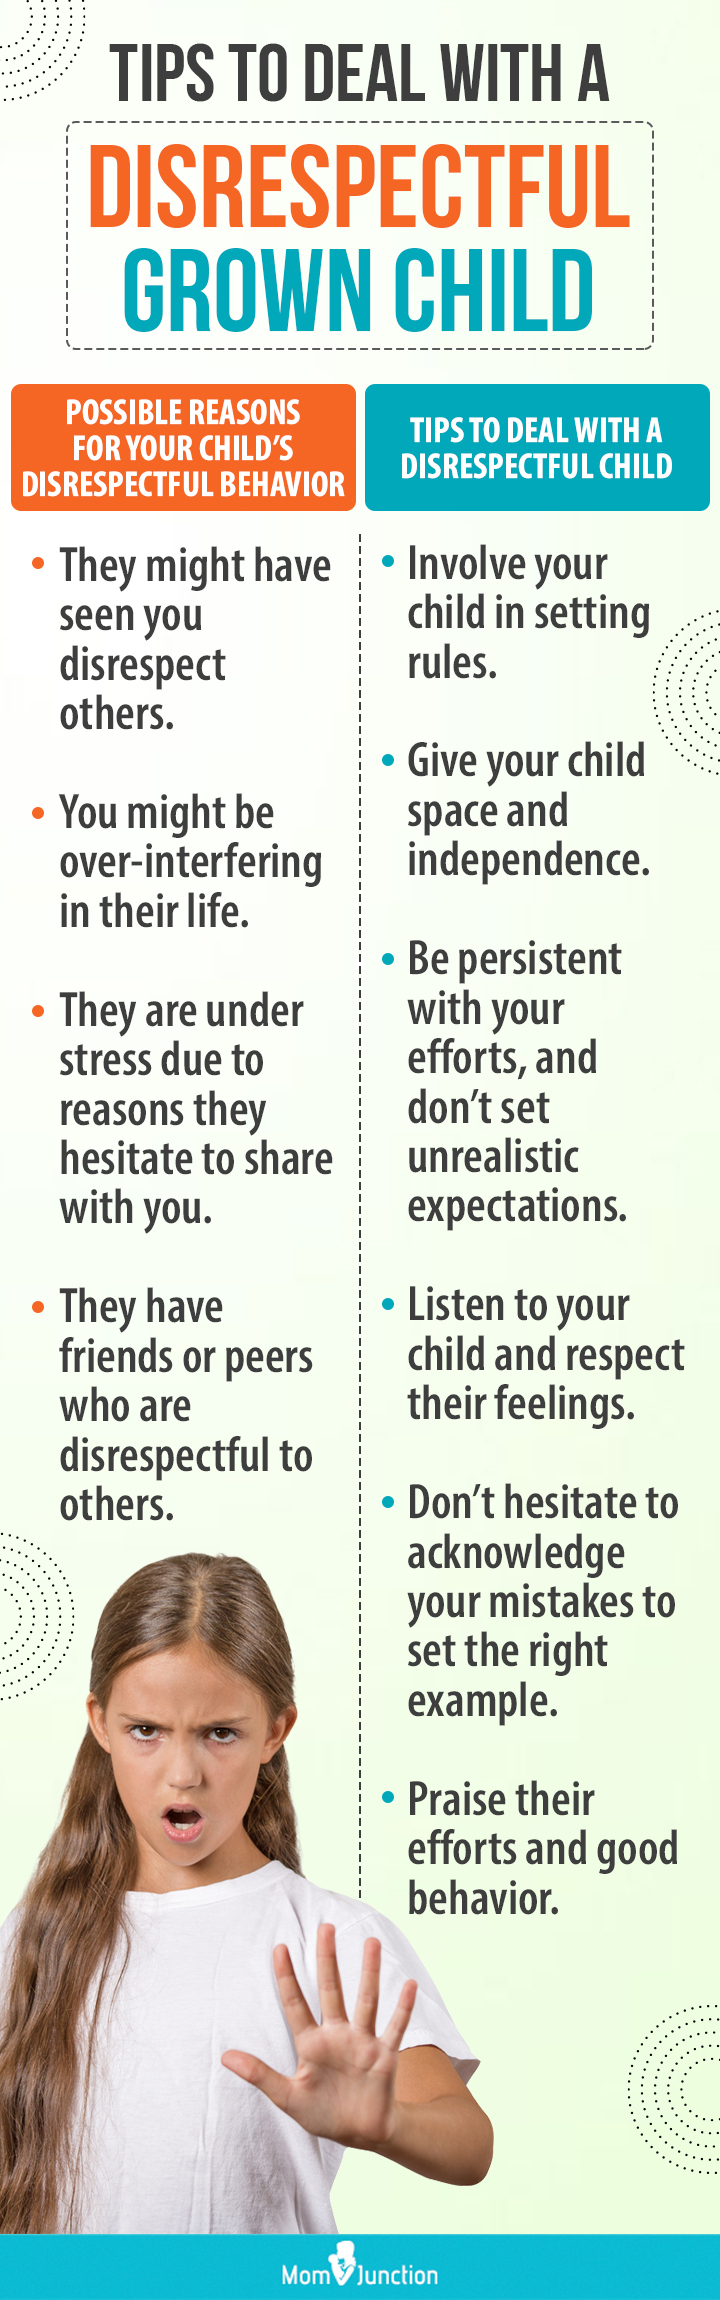 how to deal with disrespectful child [Infographic]